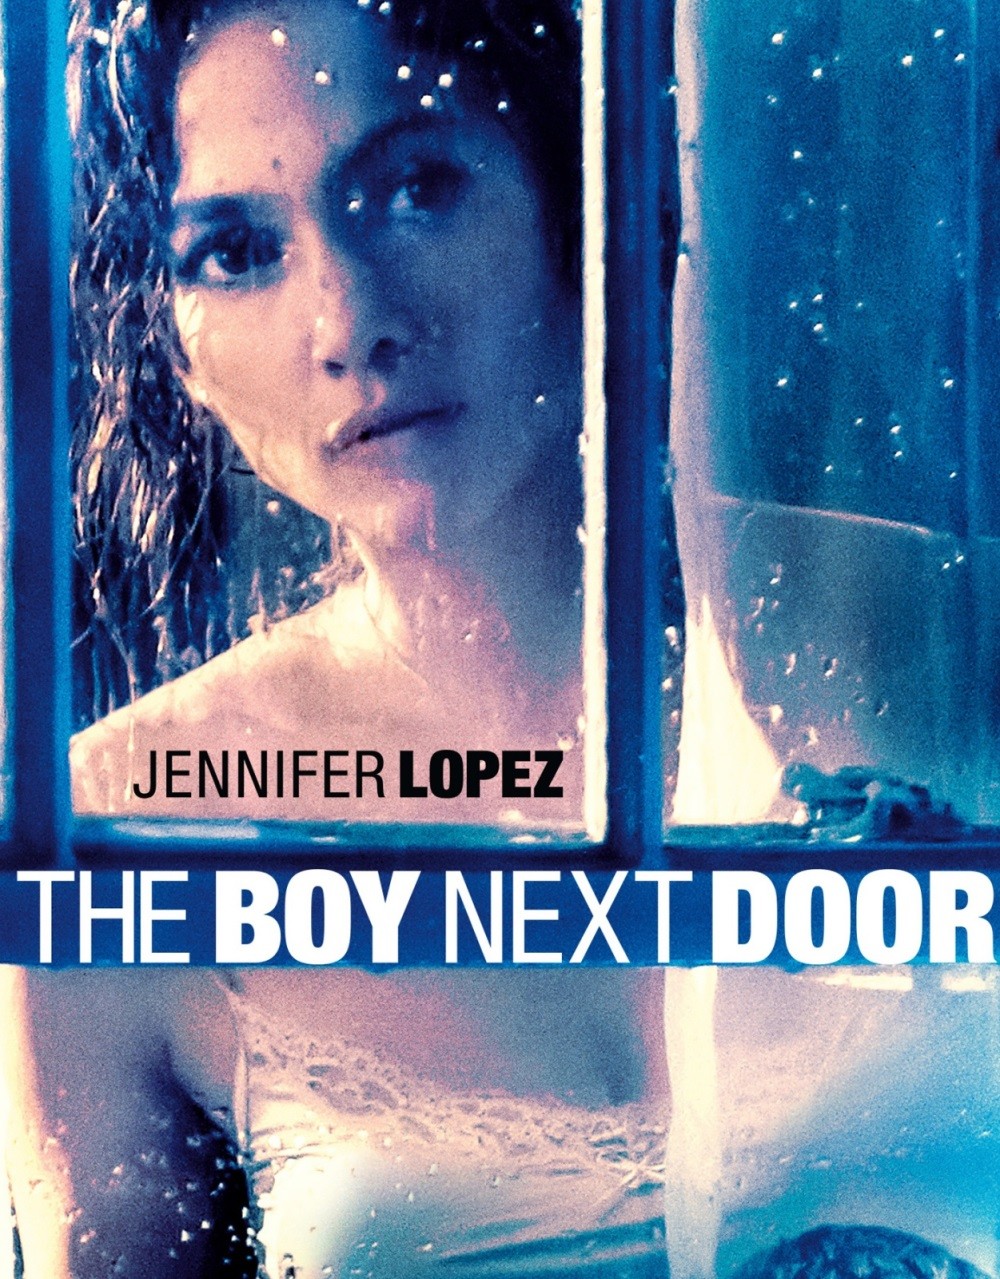 The Boy Next Door - Obsesion (0744)